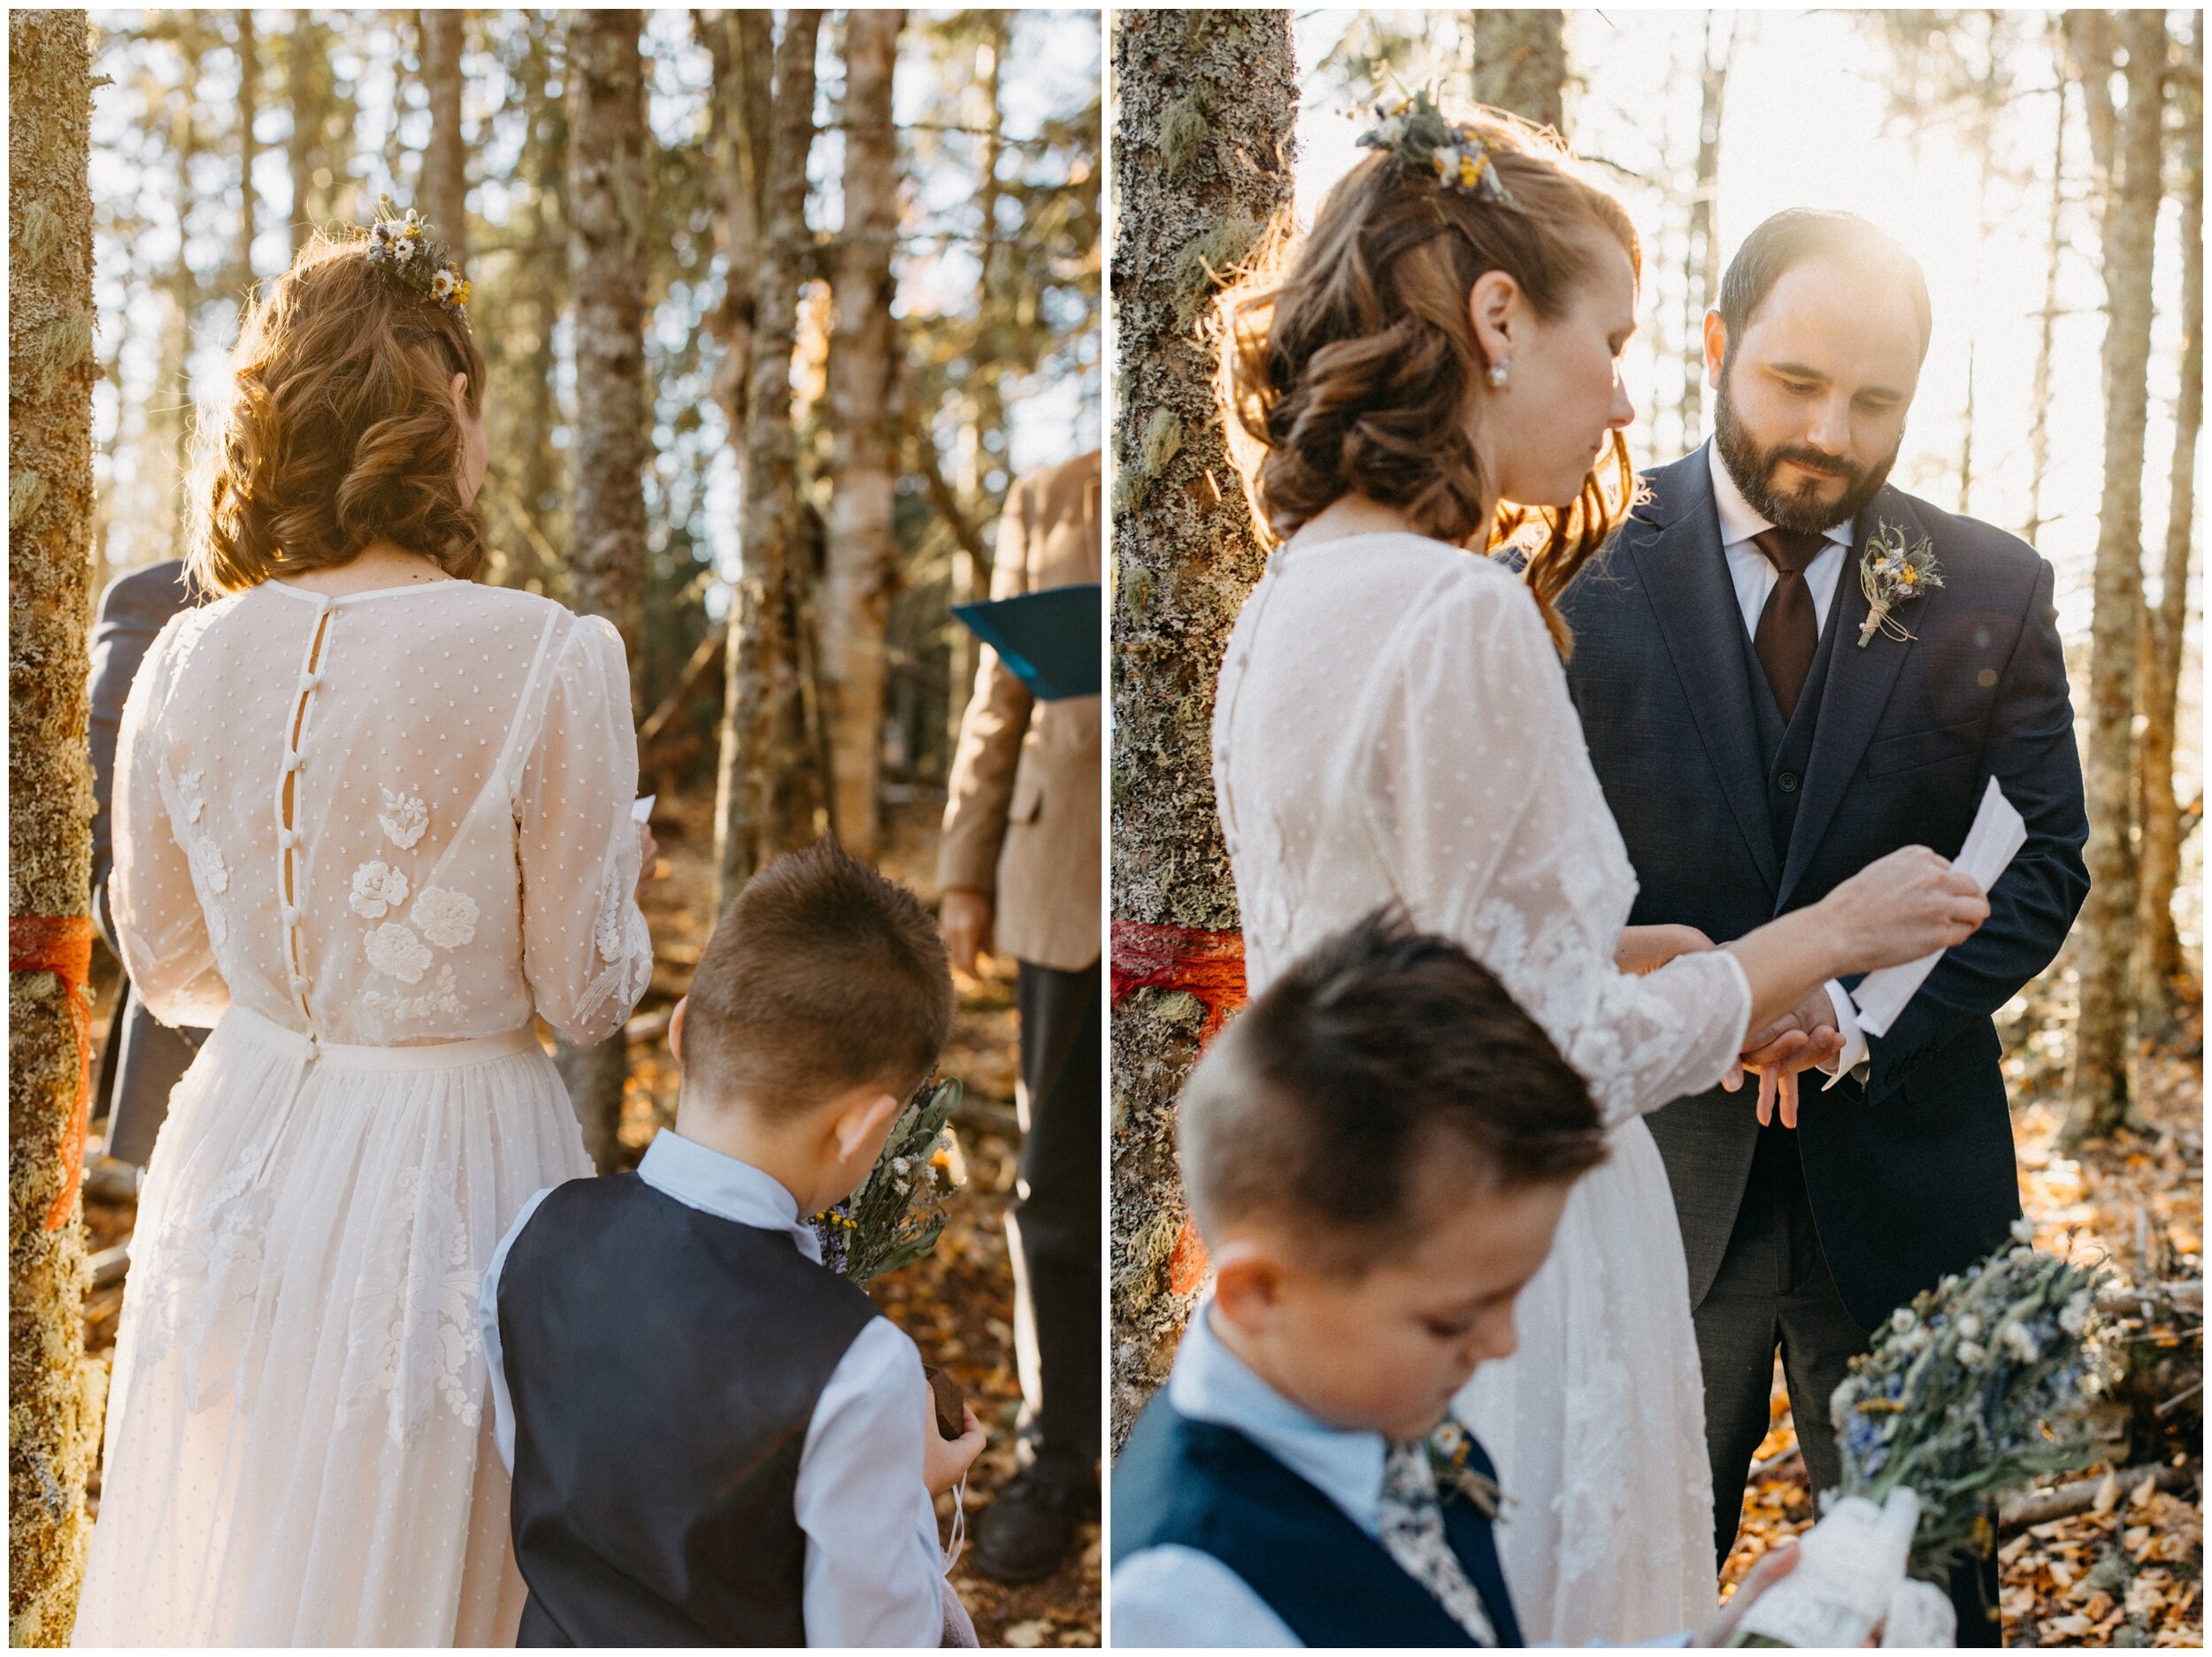 Bride reading wedding vows during ceremony in the woods on Artists' Point in Grand Marais, MN